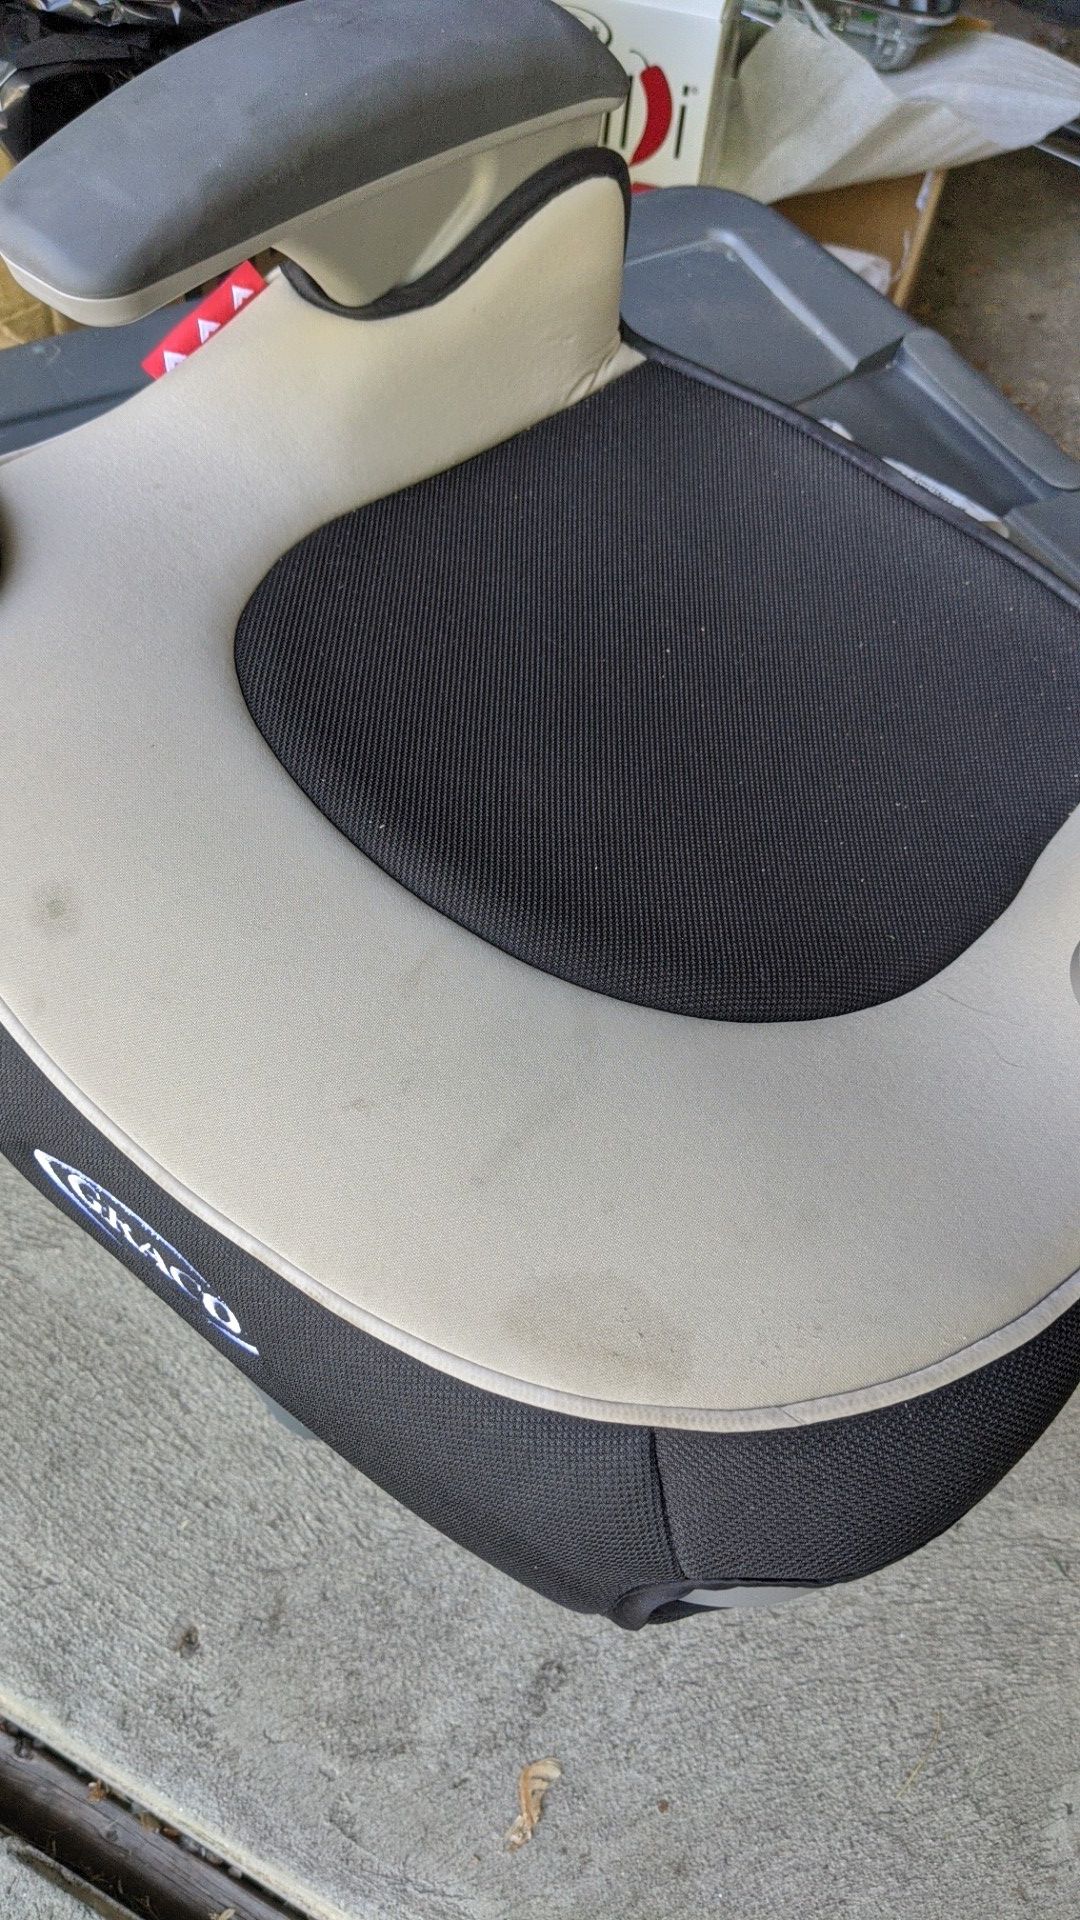 Graco booster seat with cup holders